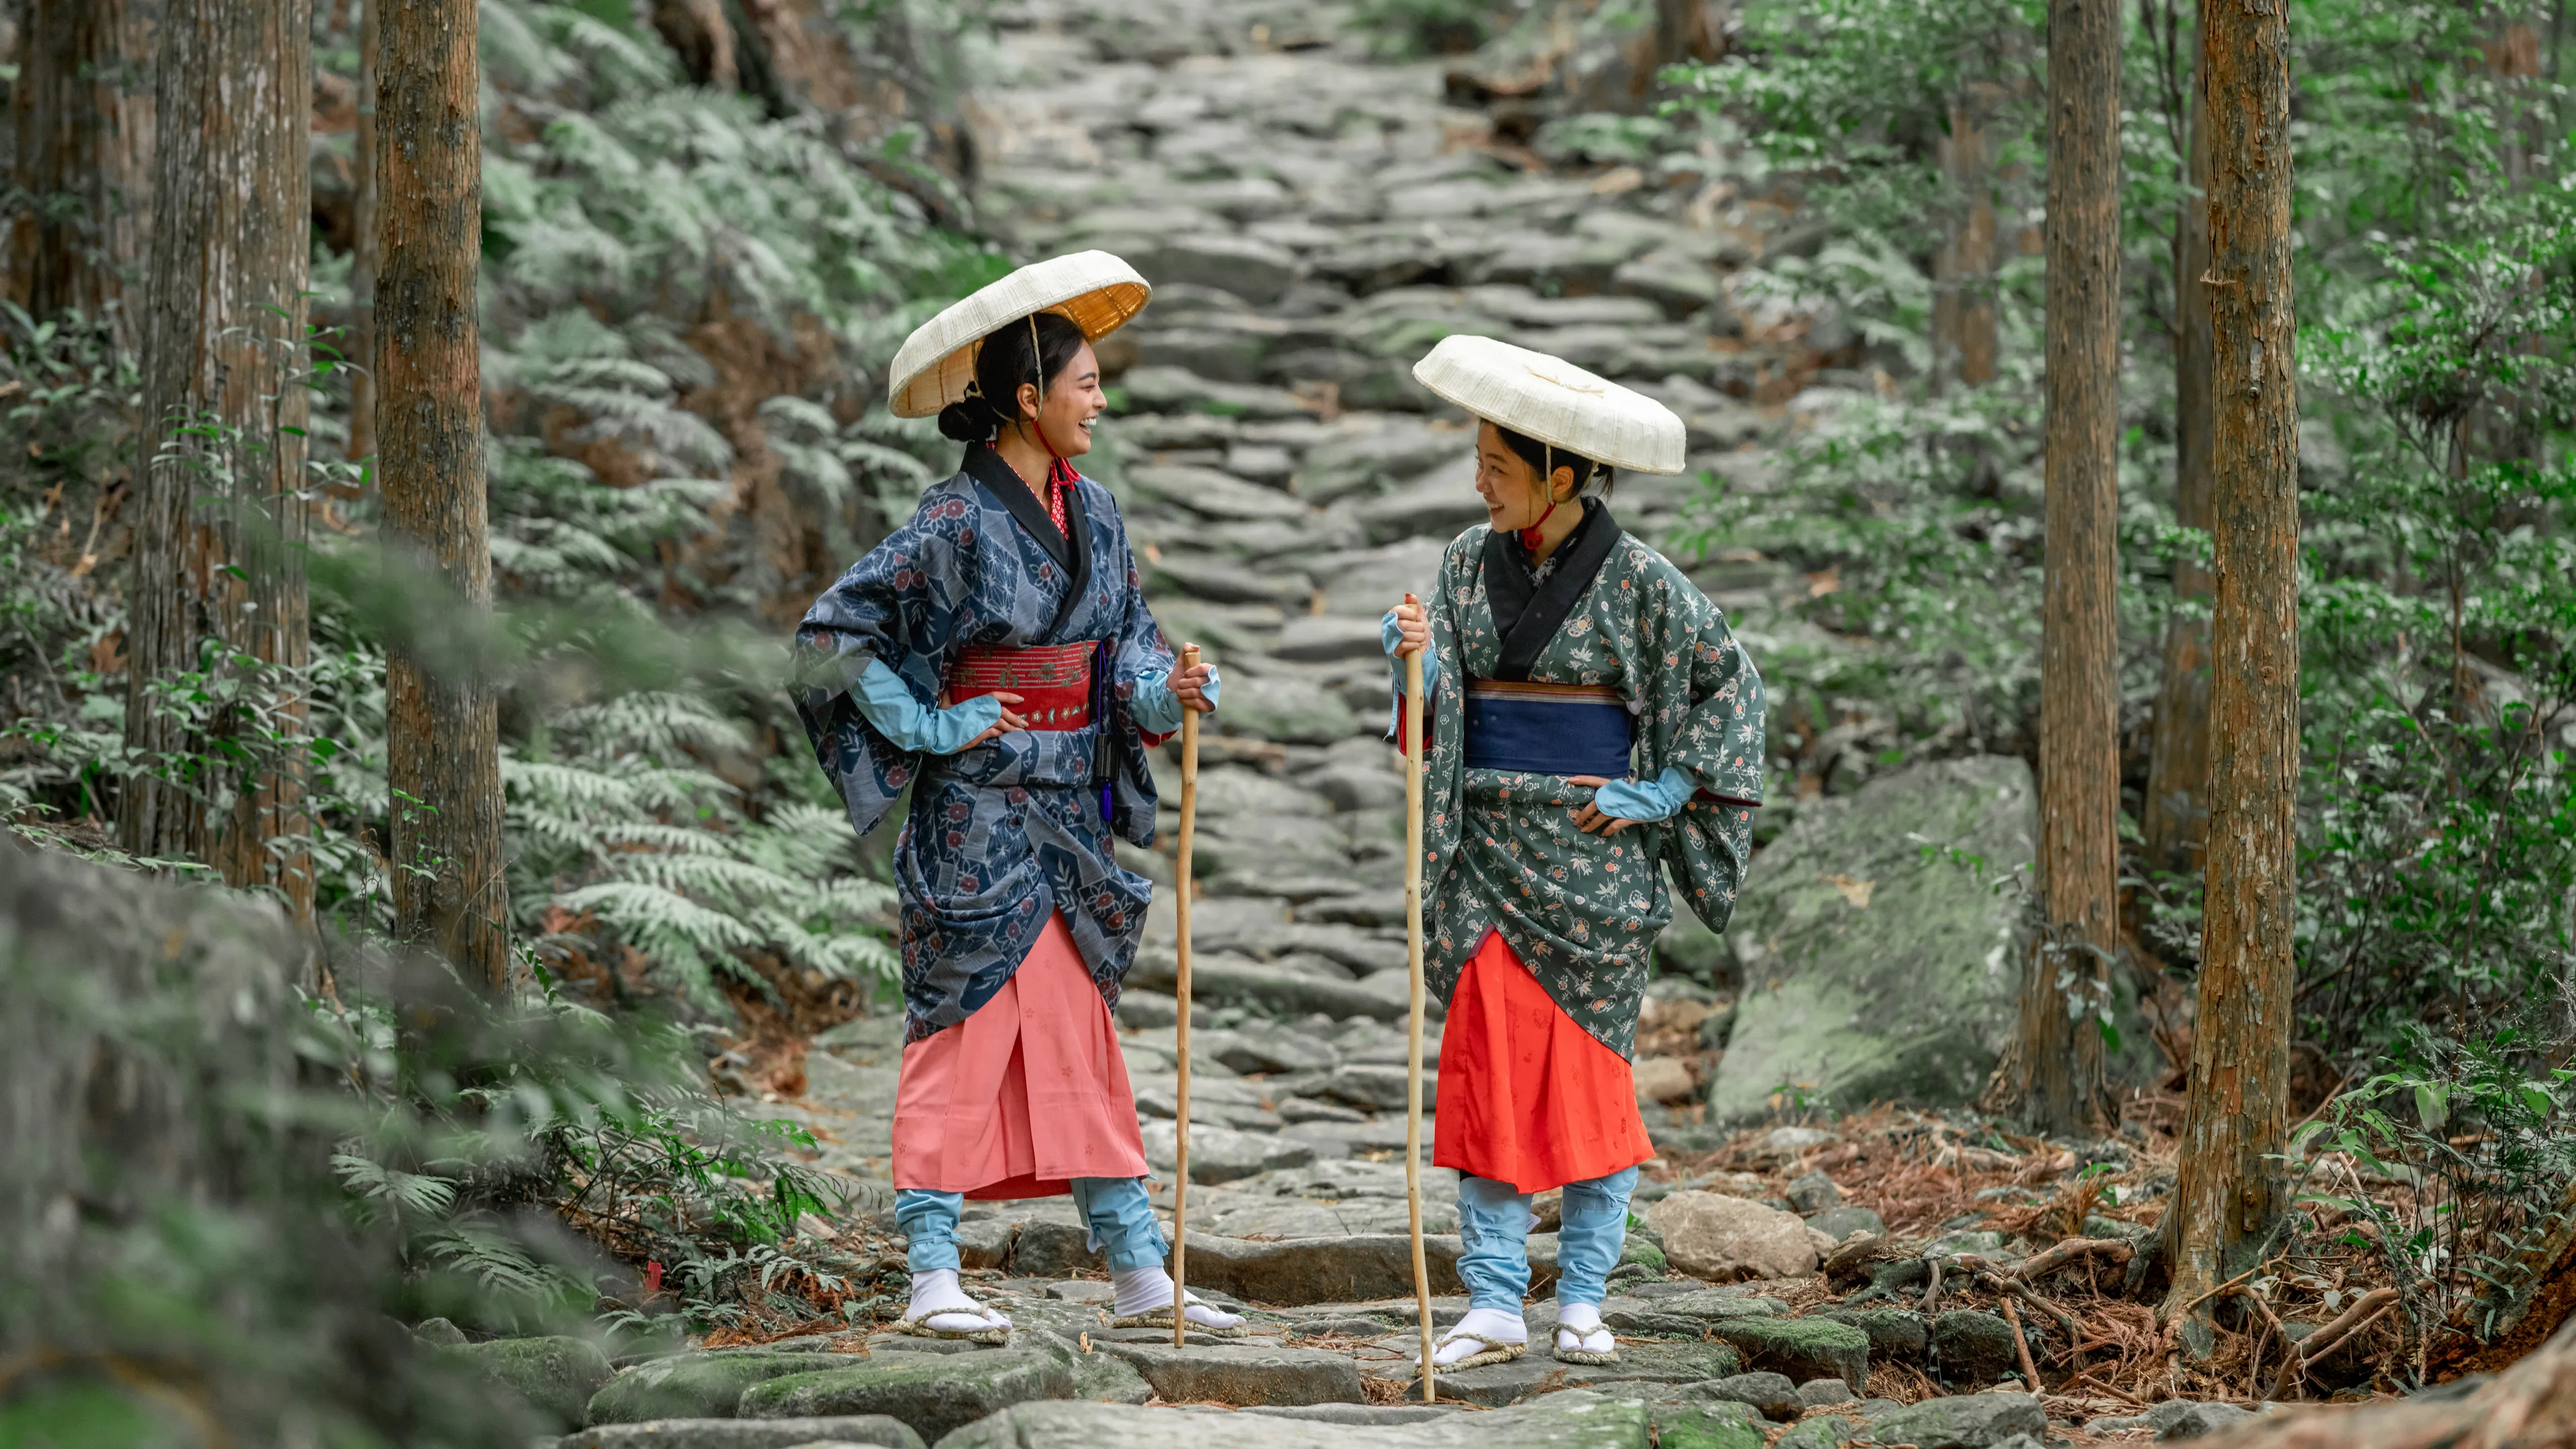 Walk the Magose pass on the Kumano Kodo trail, UNESCO World heritage site, in traditional travel garb